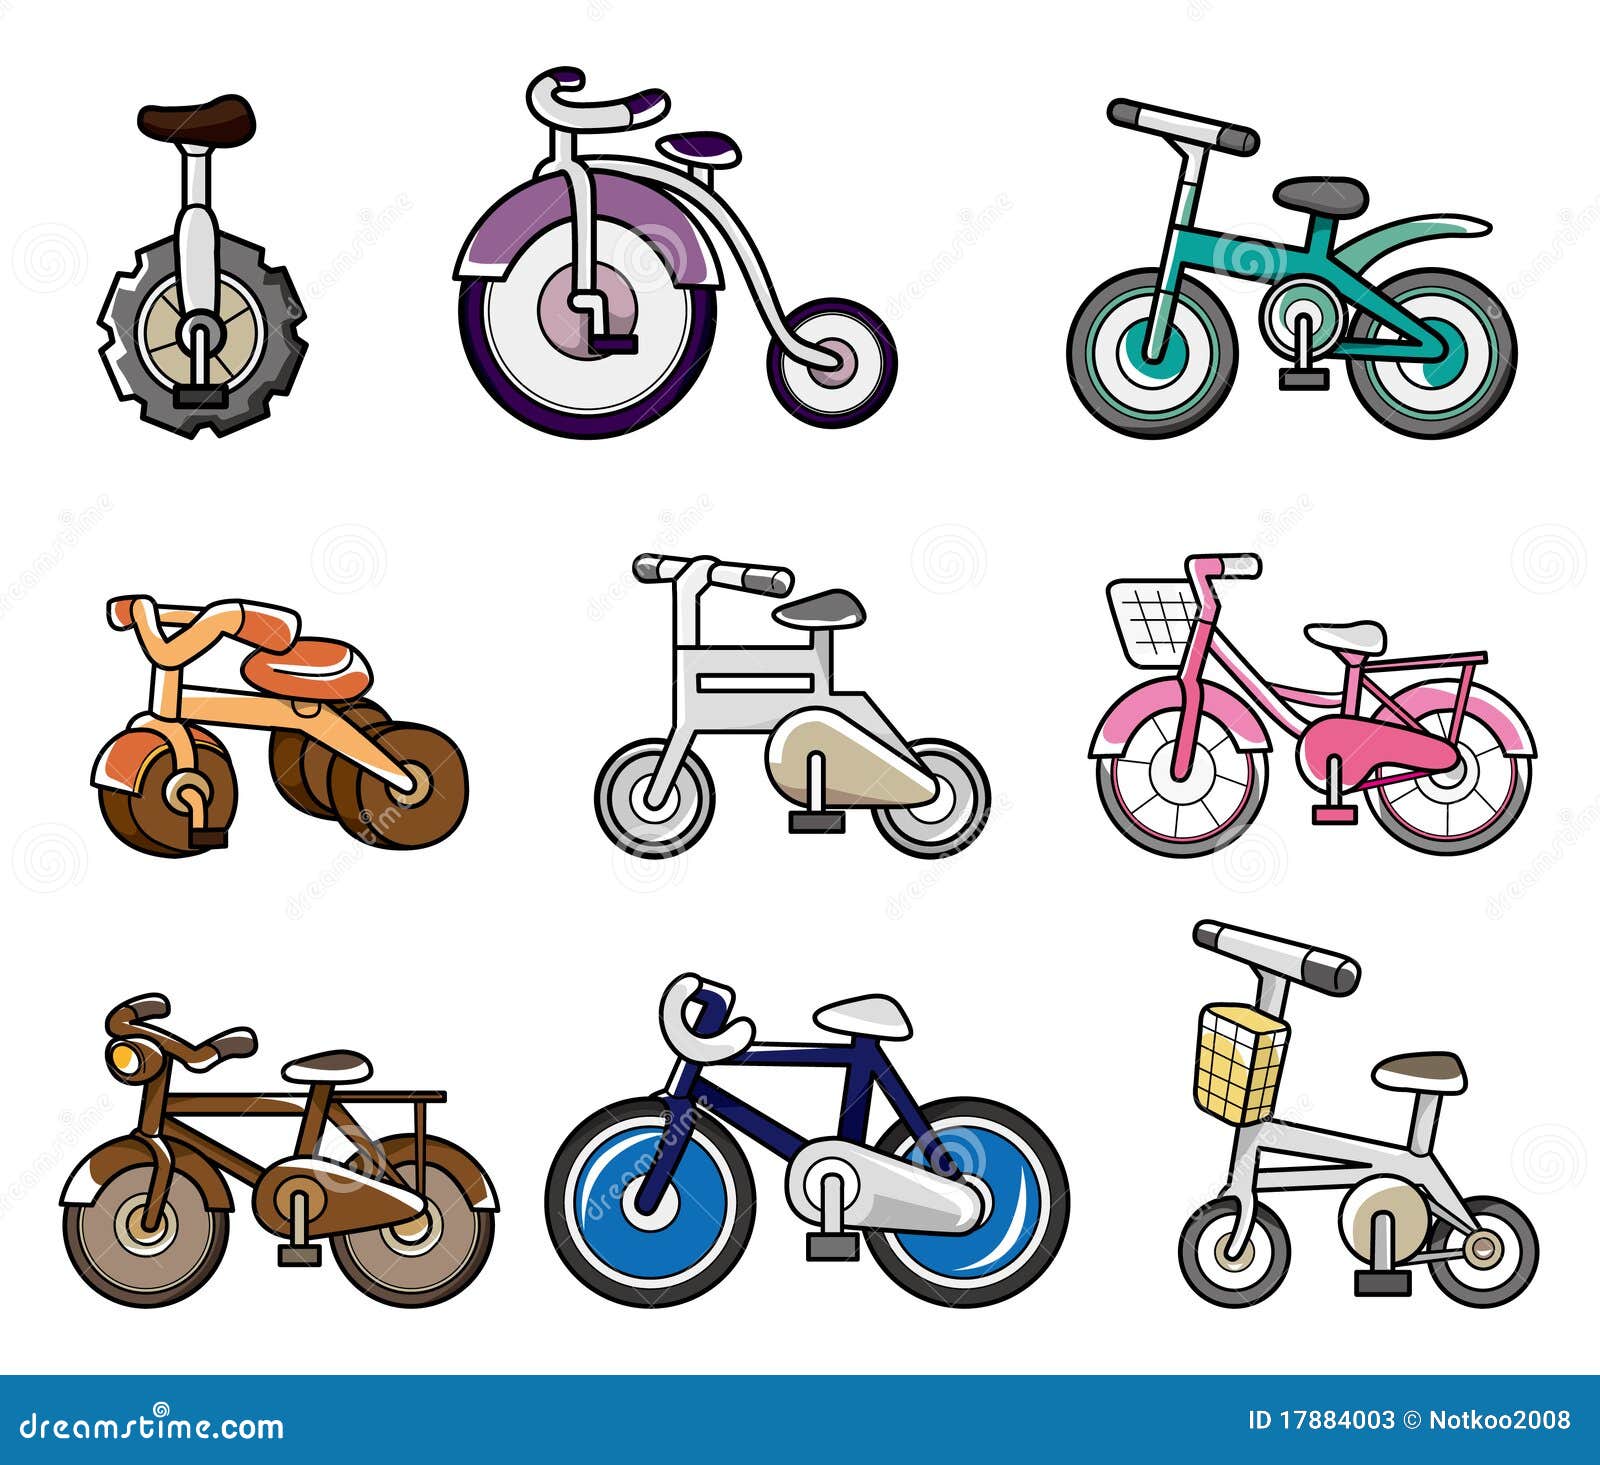 Cartoon bicycle icon stock vector. Illustration of roadster - 17884003